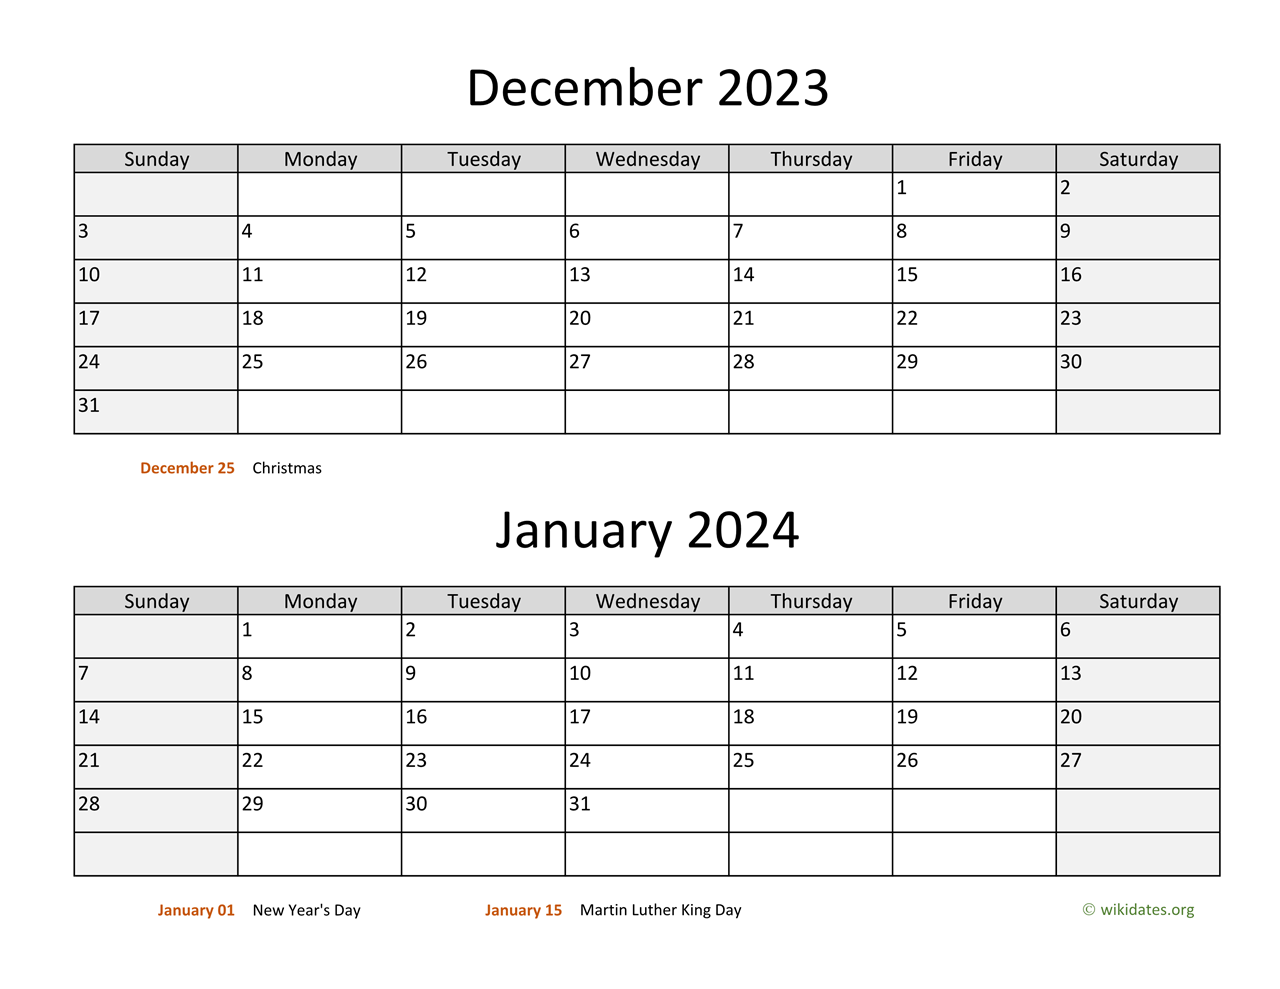 December 2023 And January 2024 Calendar | Wikidates for Printable Calendar For December 2023 And January 2024